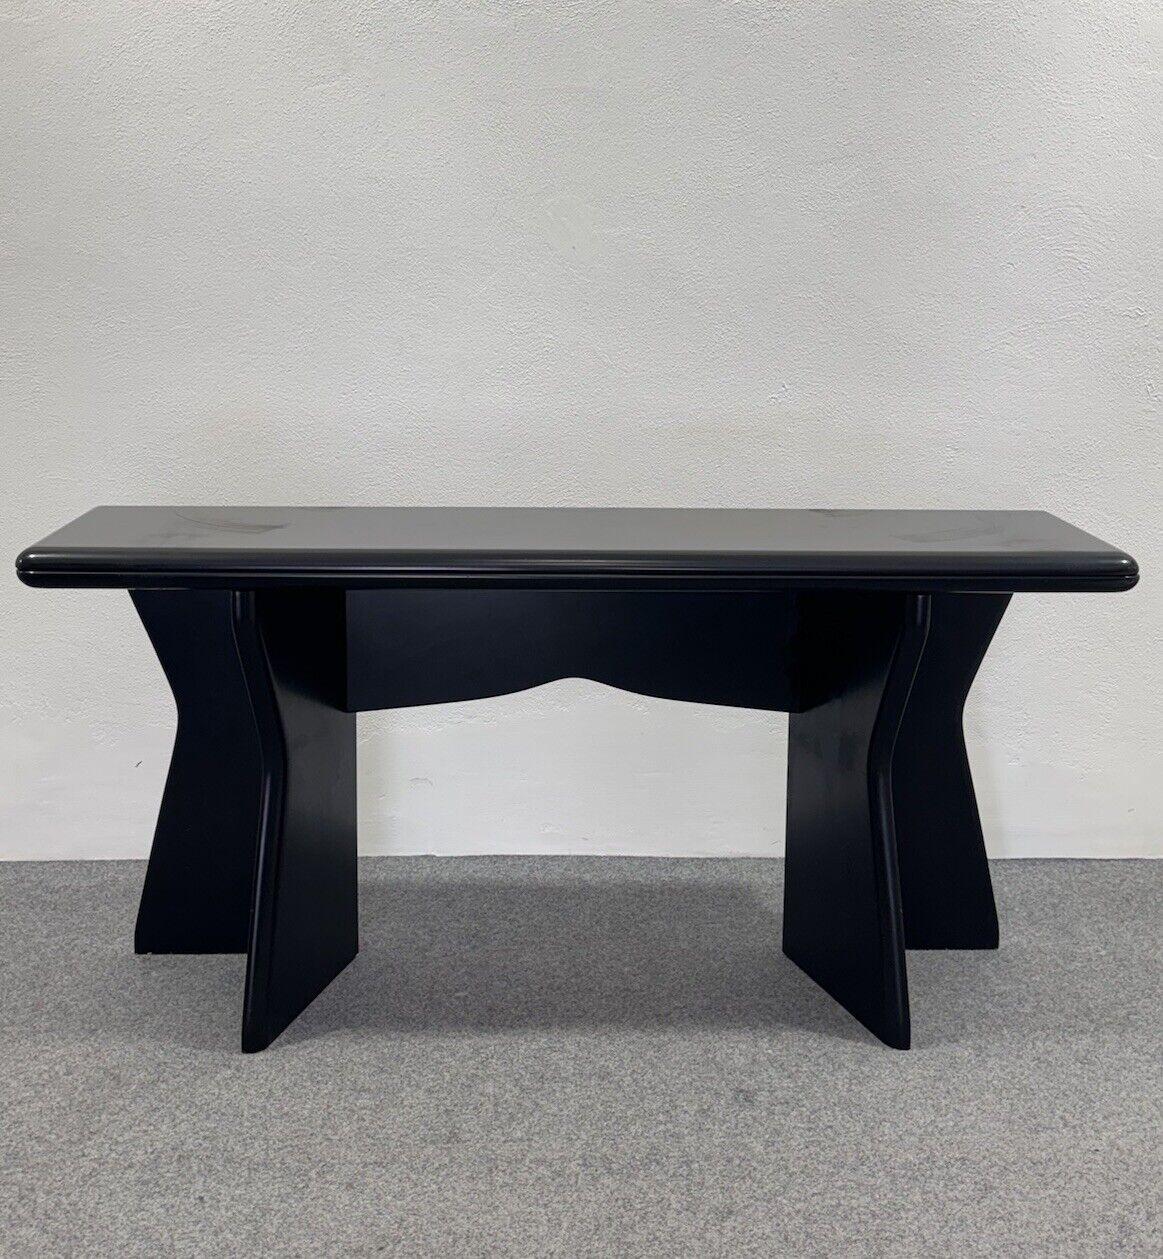 In the style of Giovanni Offredi for Saporiti Italia Book Tavolo Da Pranzo/ Consolle Design 1980's.

Structure made entirely of black lacquered wood, i transform the console table into a dining table.

The item is in excellent conservative